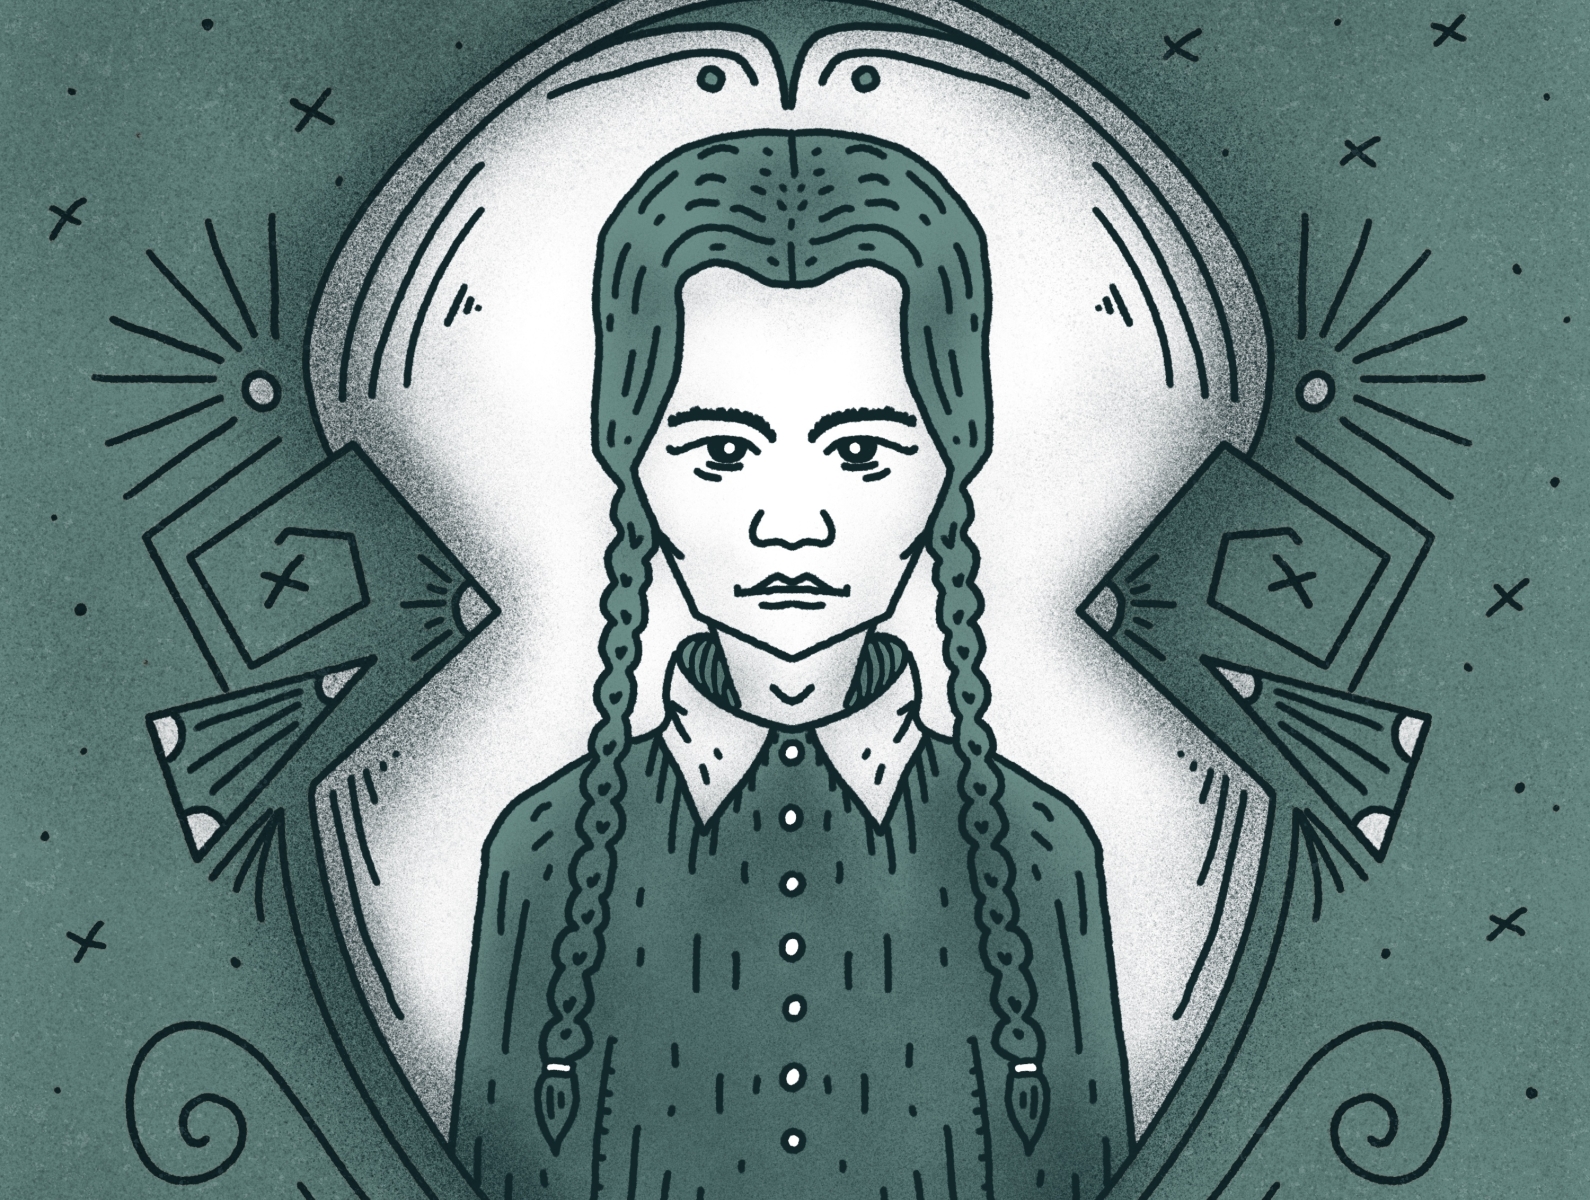 Wednesday Addams by Blake Haake on Dribbble